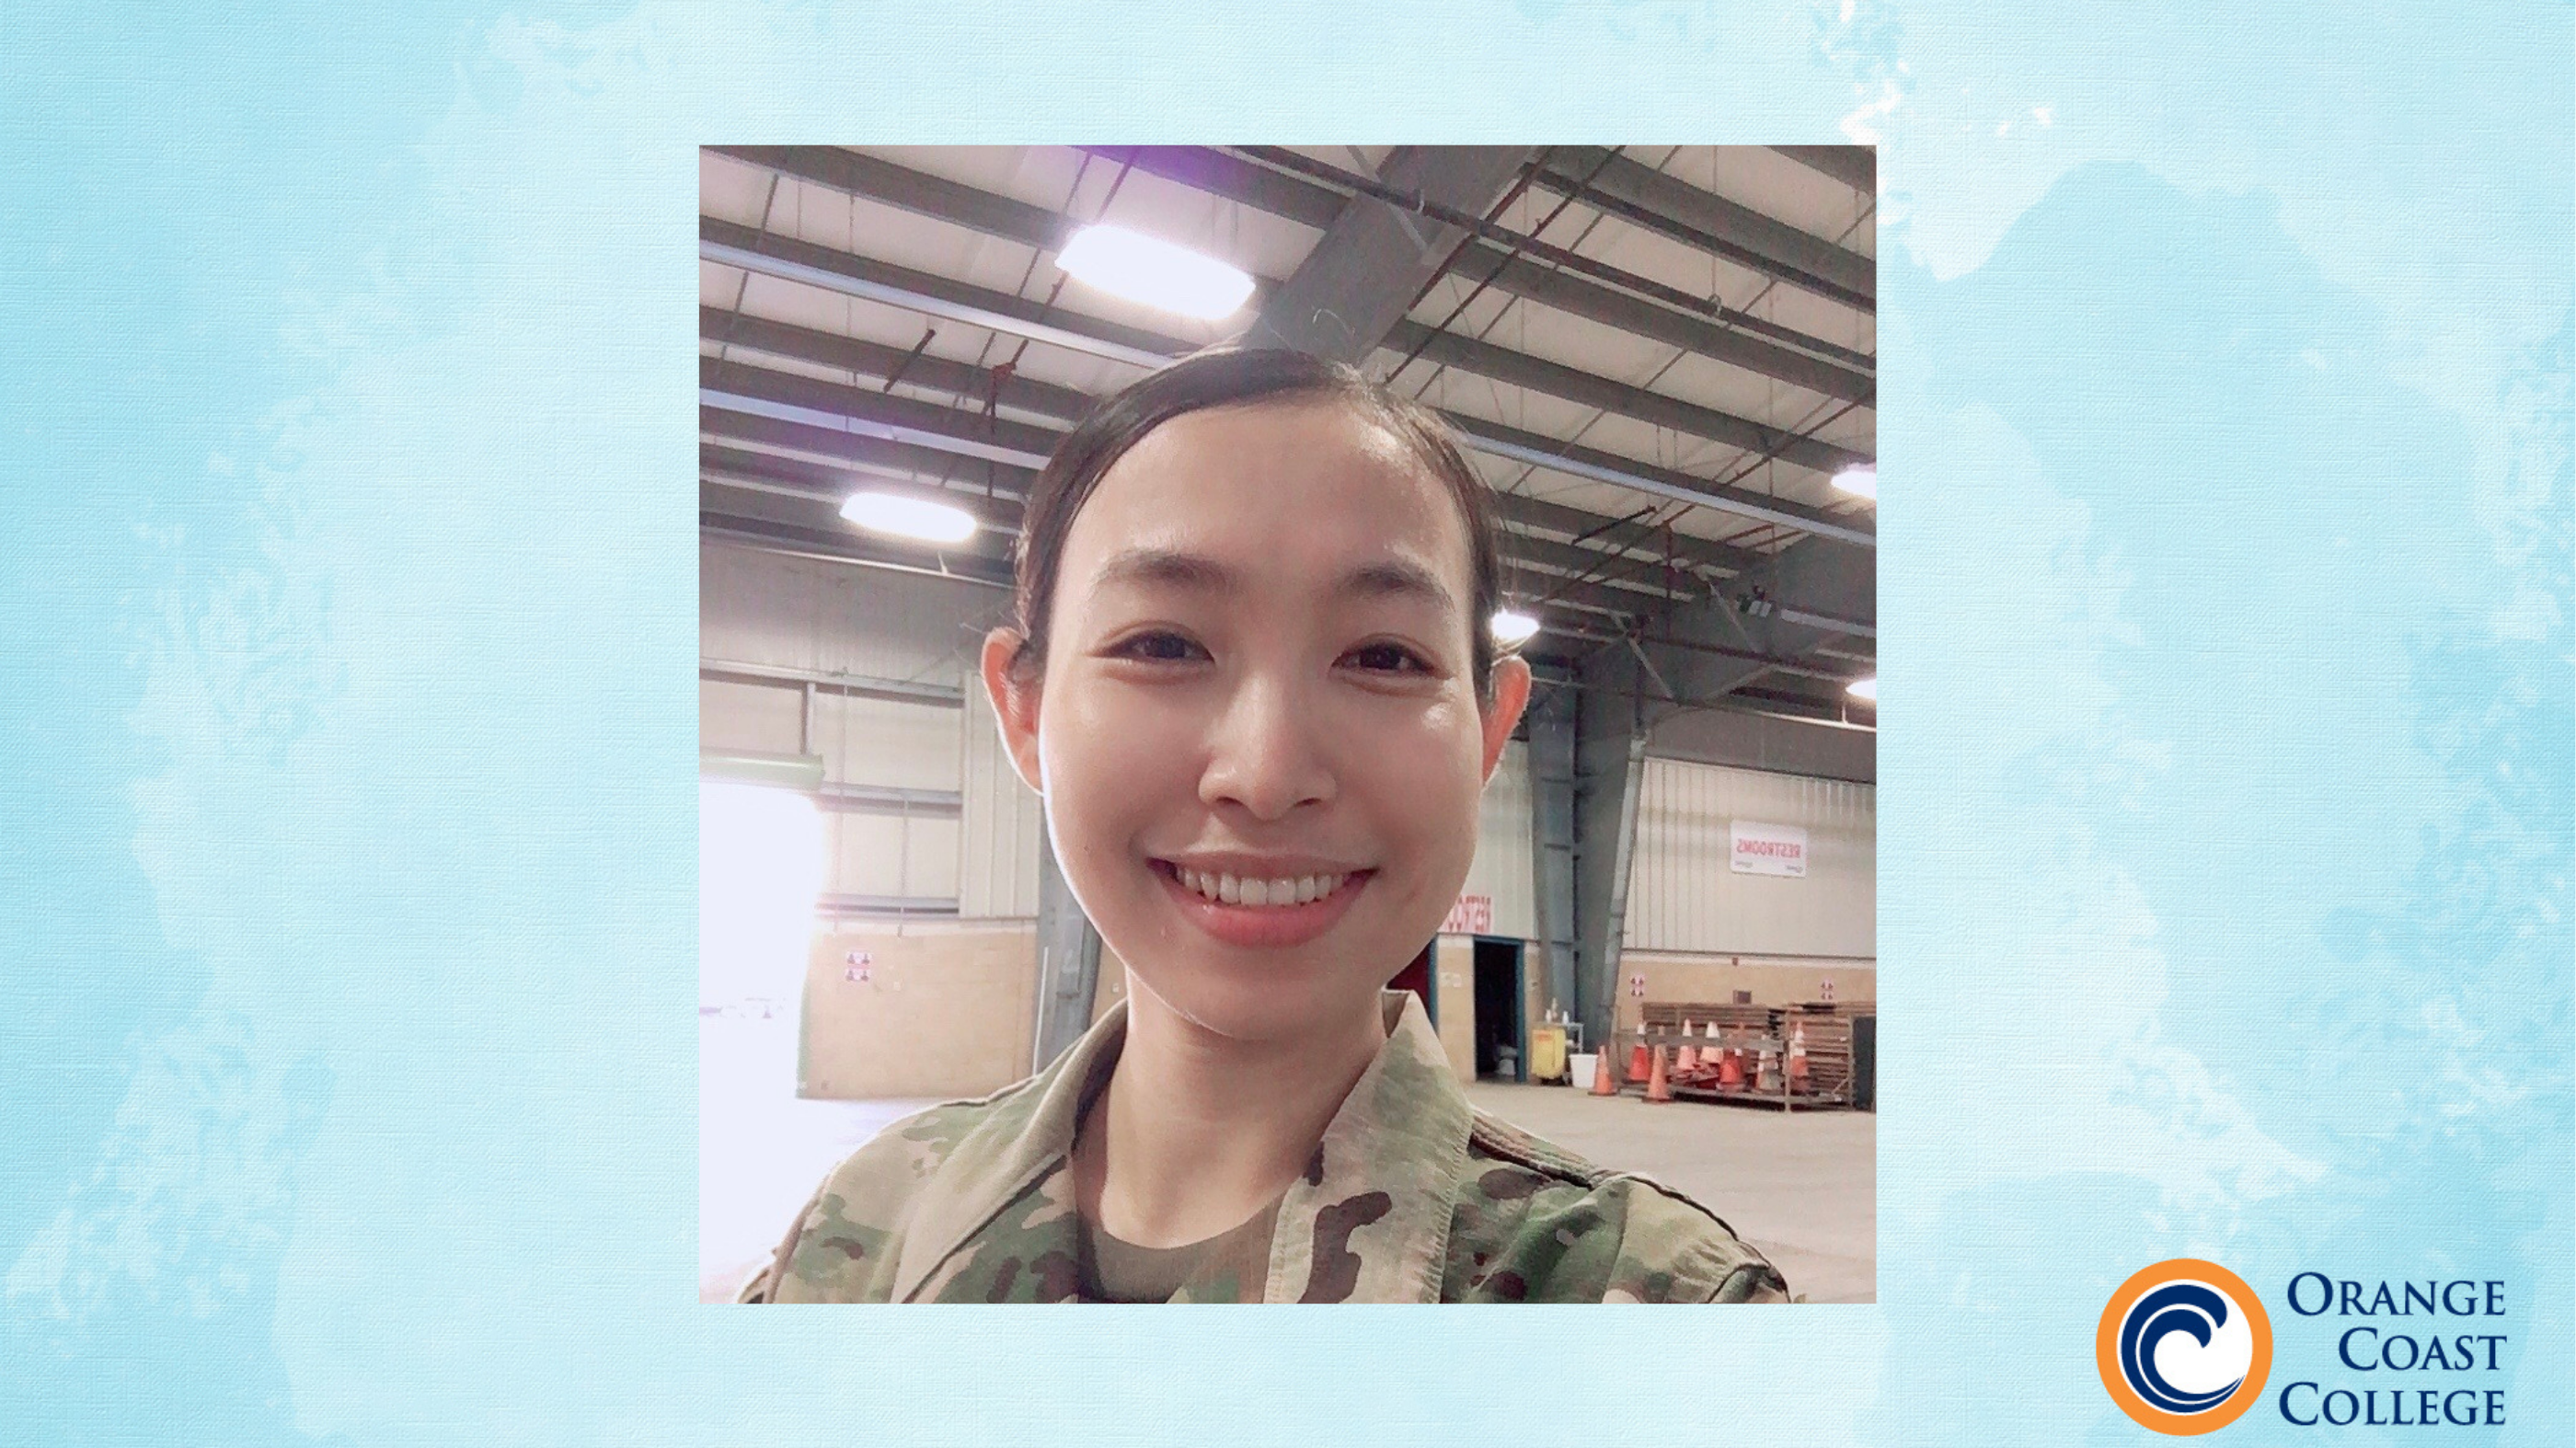 selfie photograph of isabelle phan wearing army uniform. photo is set against light blue watercolor background with orange coast college logo in lower right corner